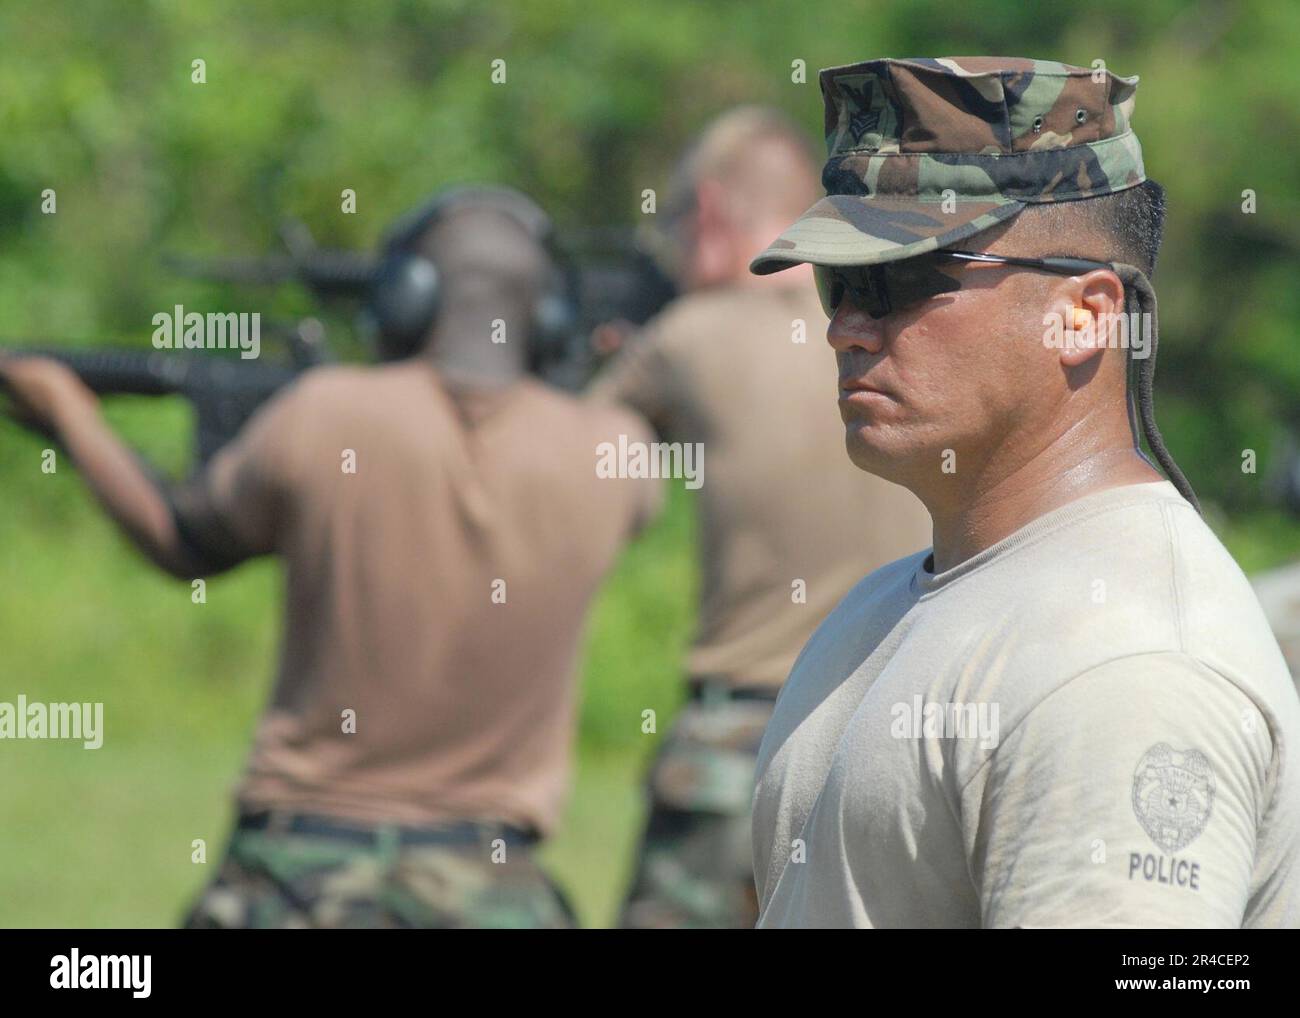 US Navy Petty Officer 1st Class observes Sailors during a M16A1 qualification at the Naval Base Guam gun range Stock Photo